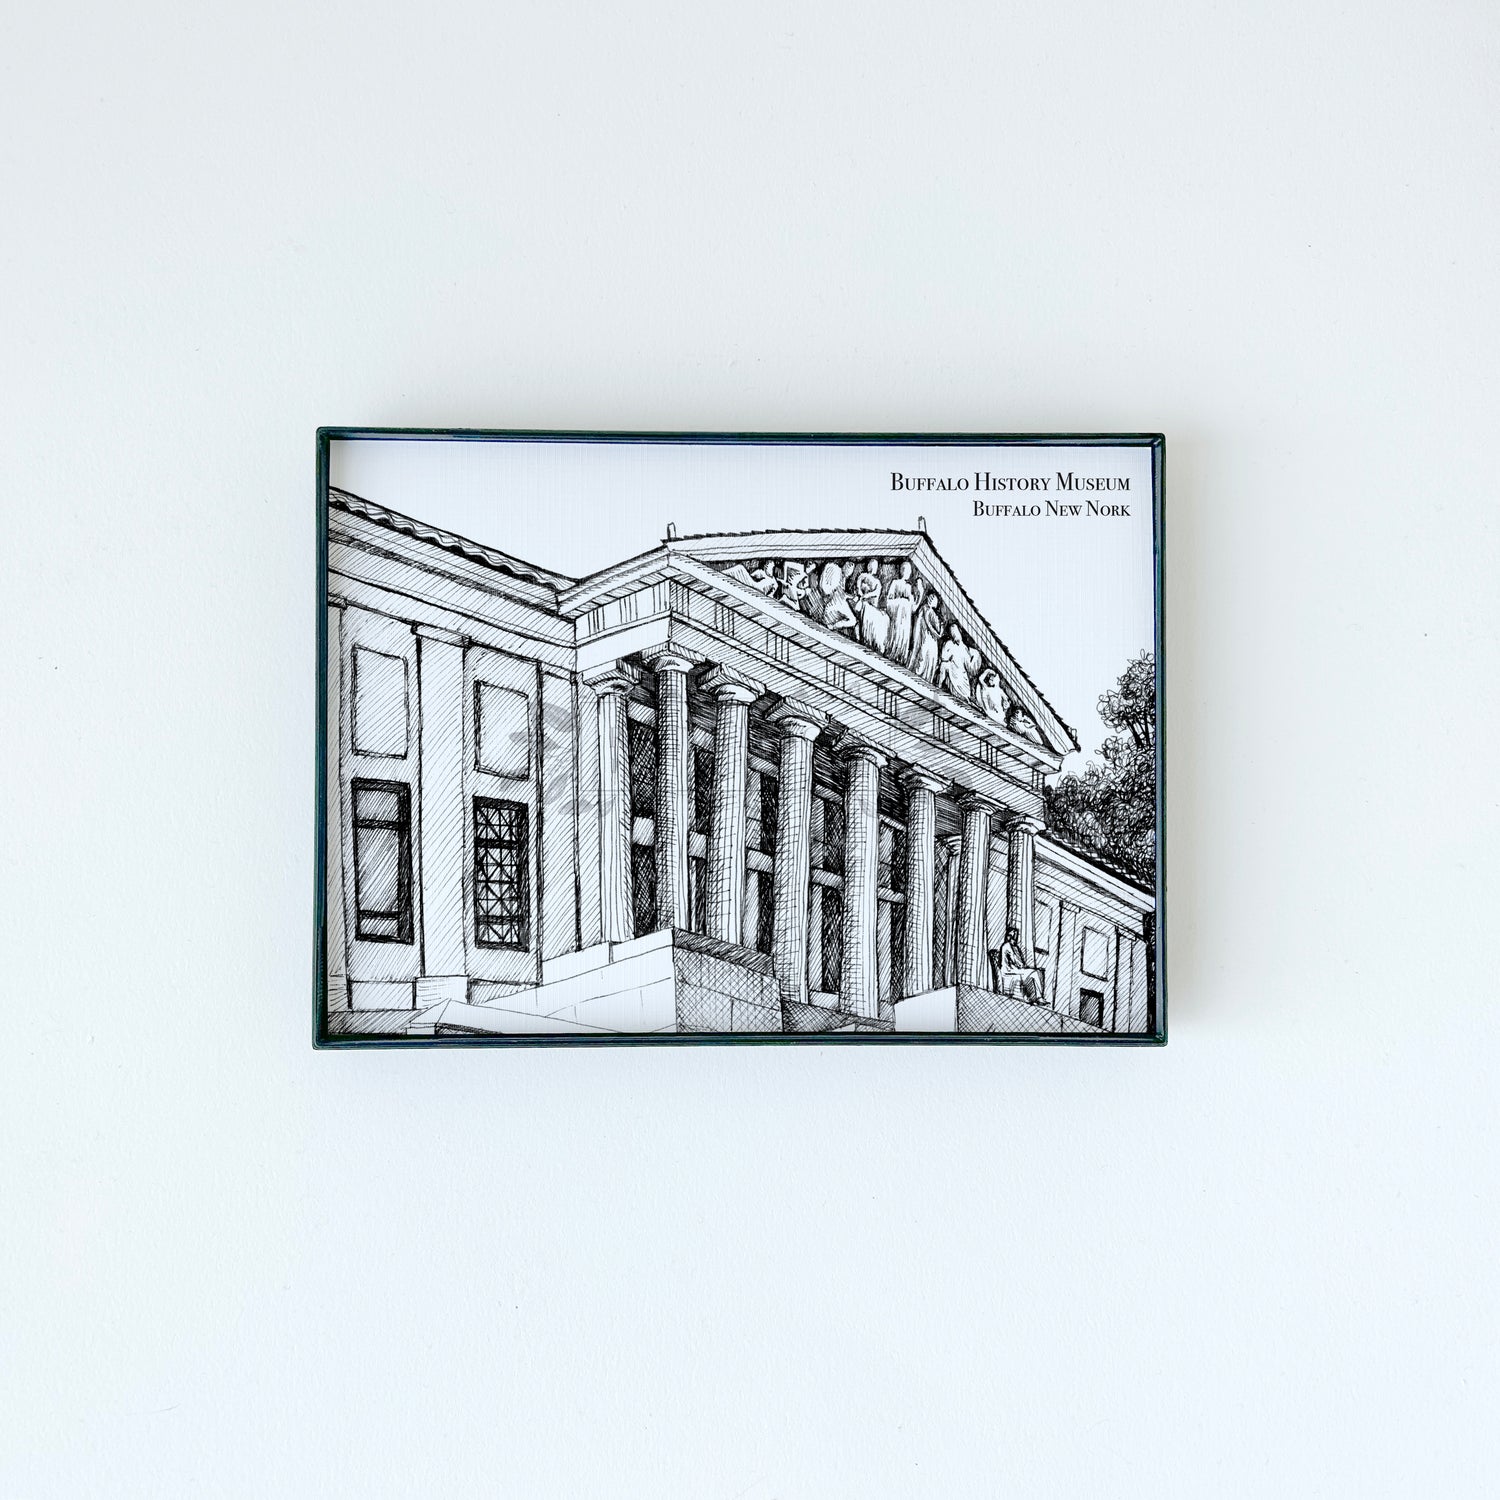 Buffalo History Museum illustration in black ink on white paper by Rust Belt Love